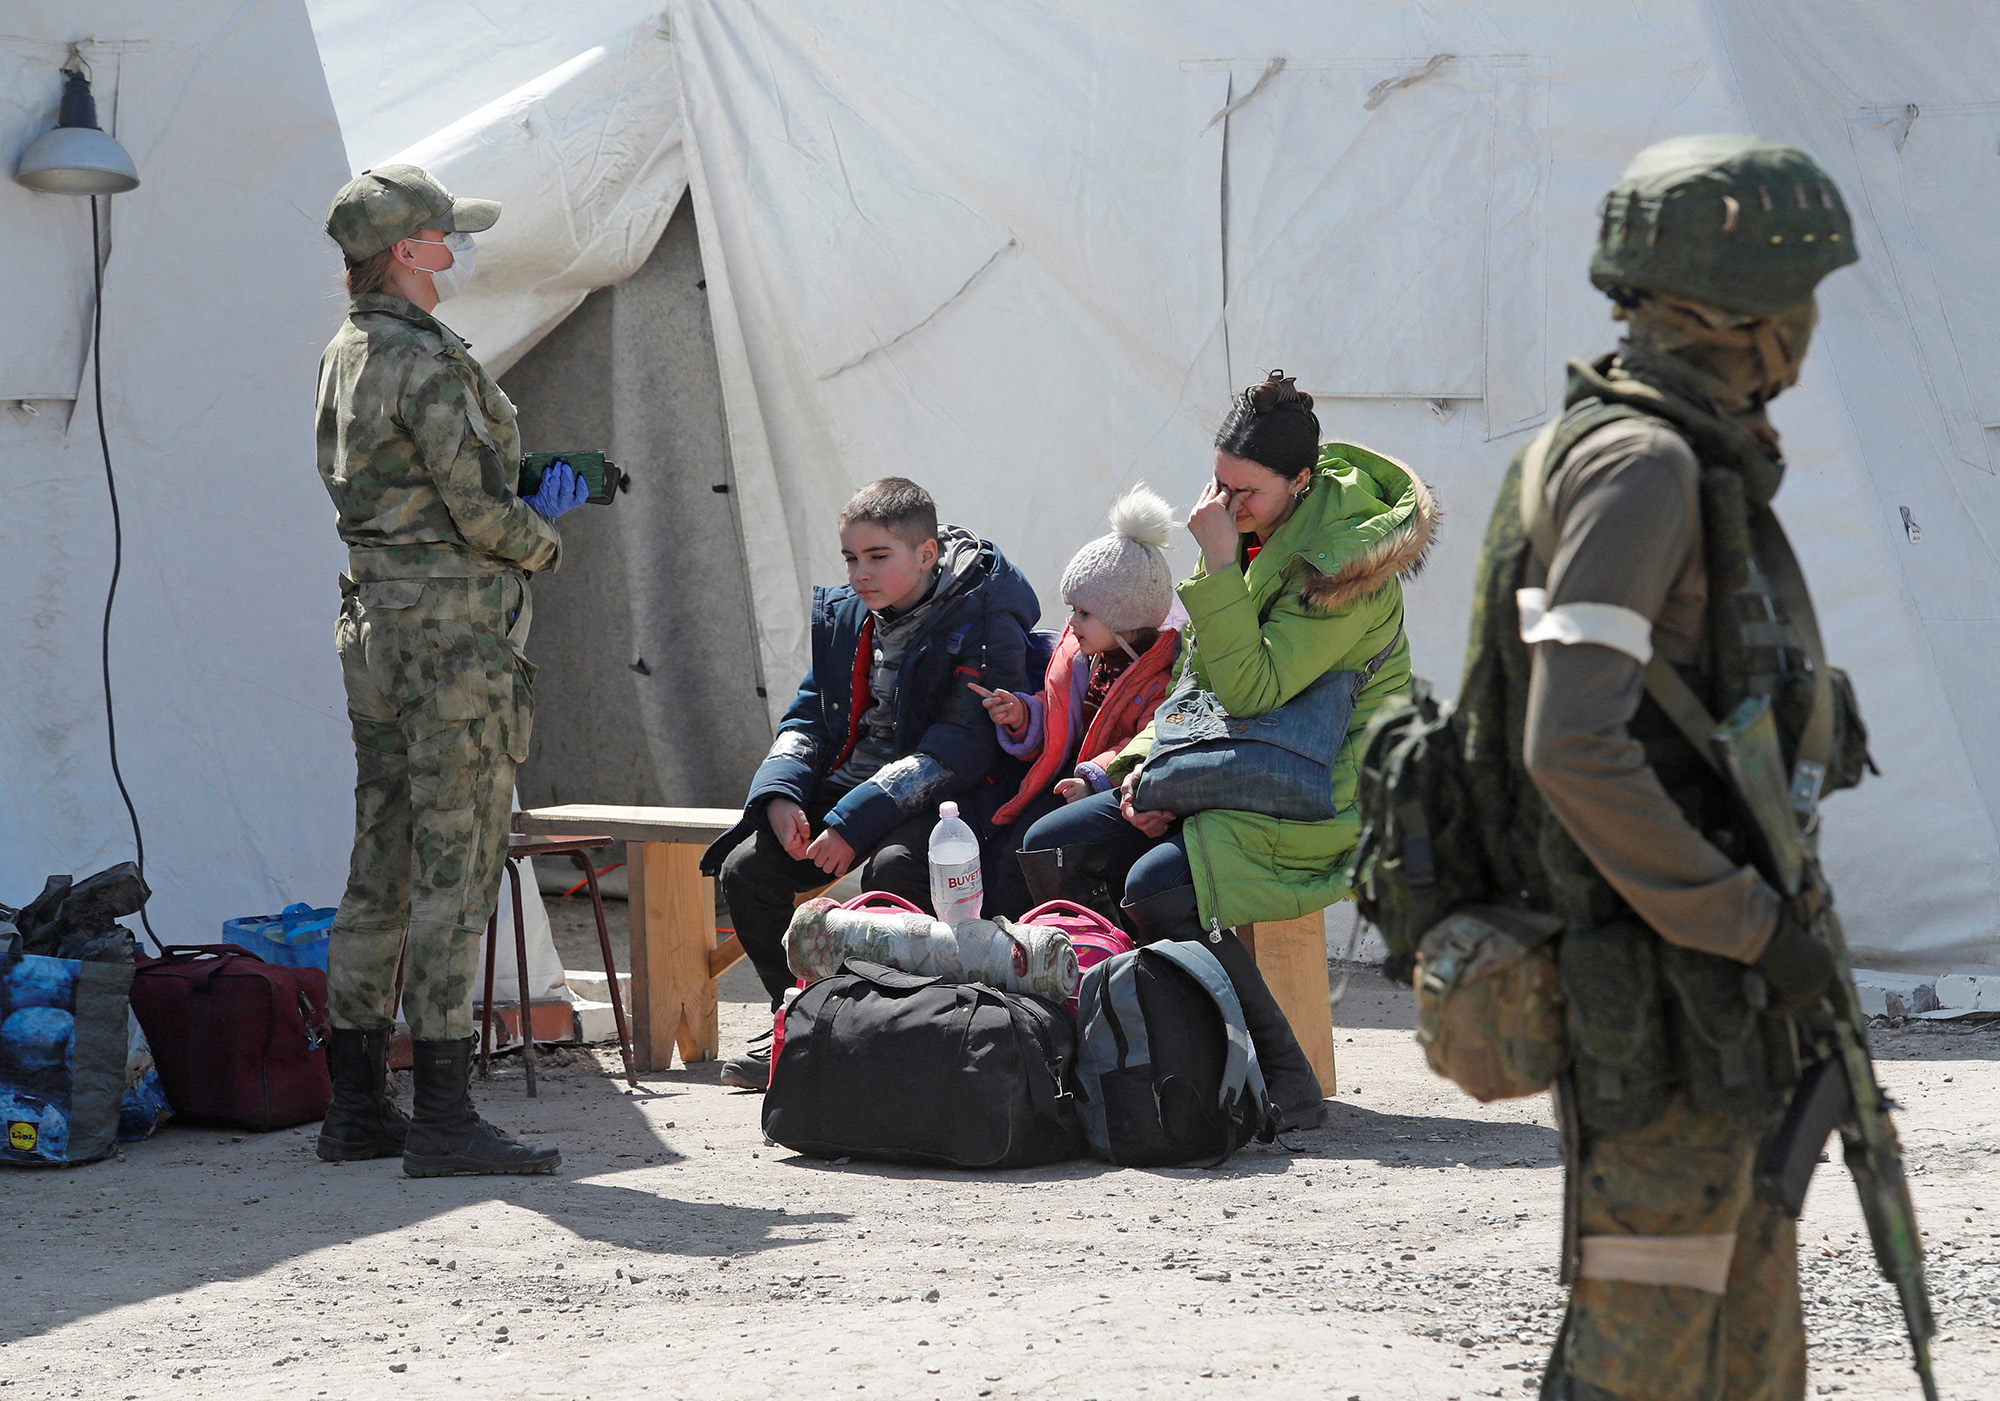 Evacuees, including civilians who left the area near the Azovstal steel plant in Mariupol, arrive in the Russian-held town of Bezimenne, in the Donetsk Region of Ukraine, on May 1.